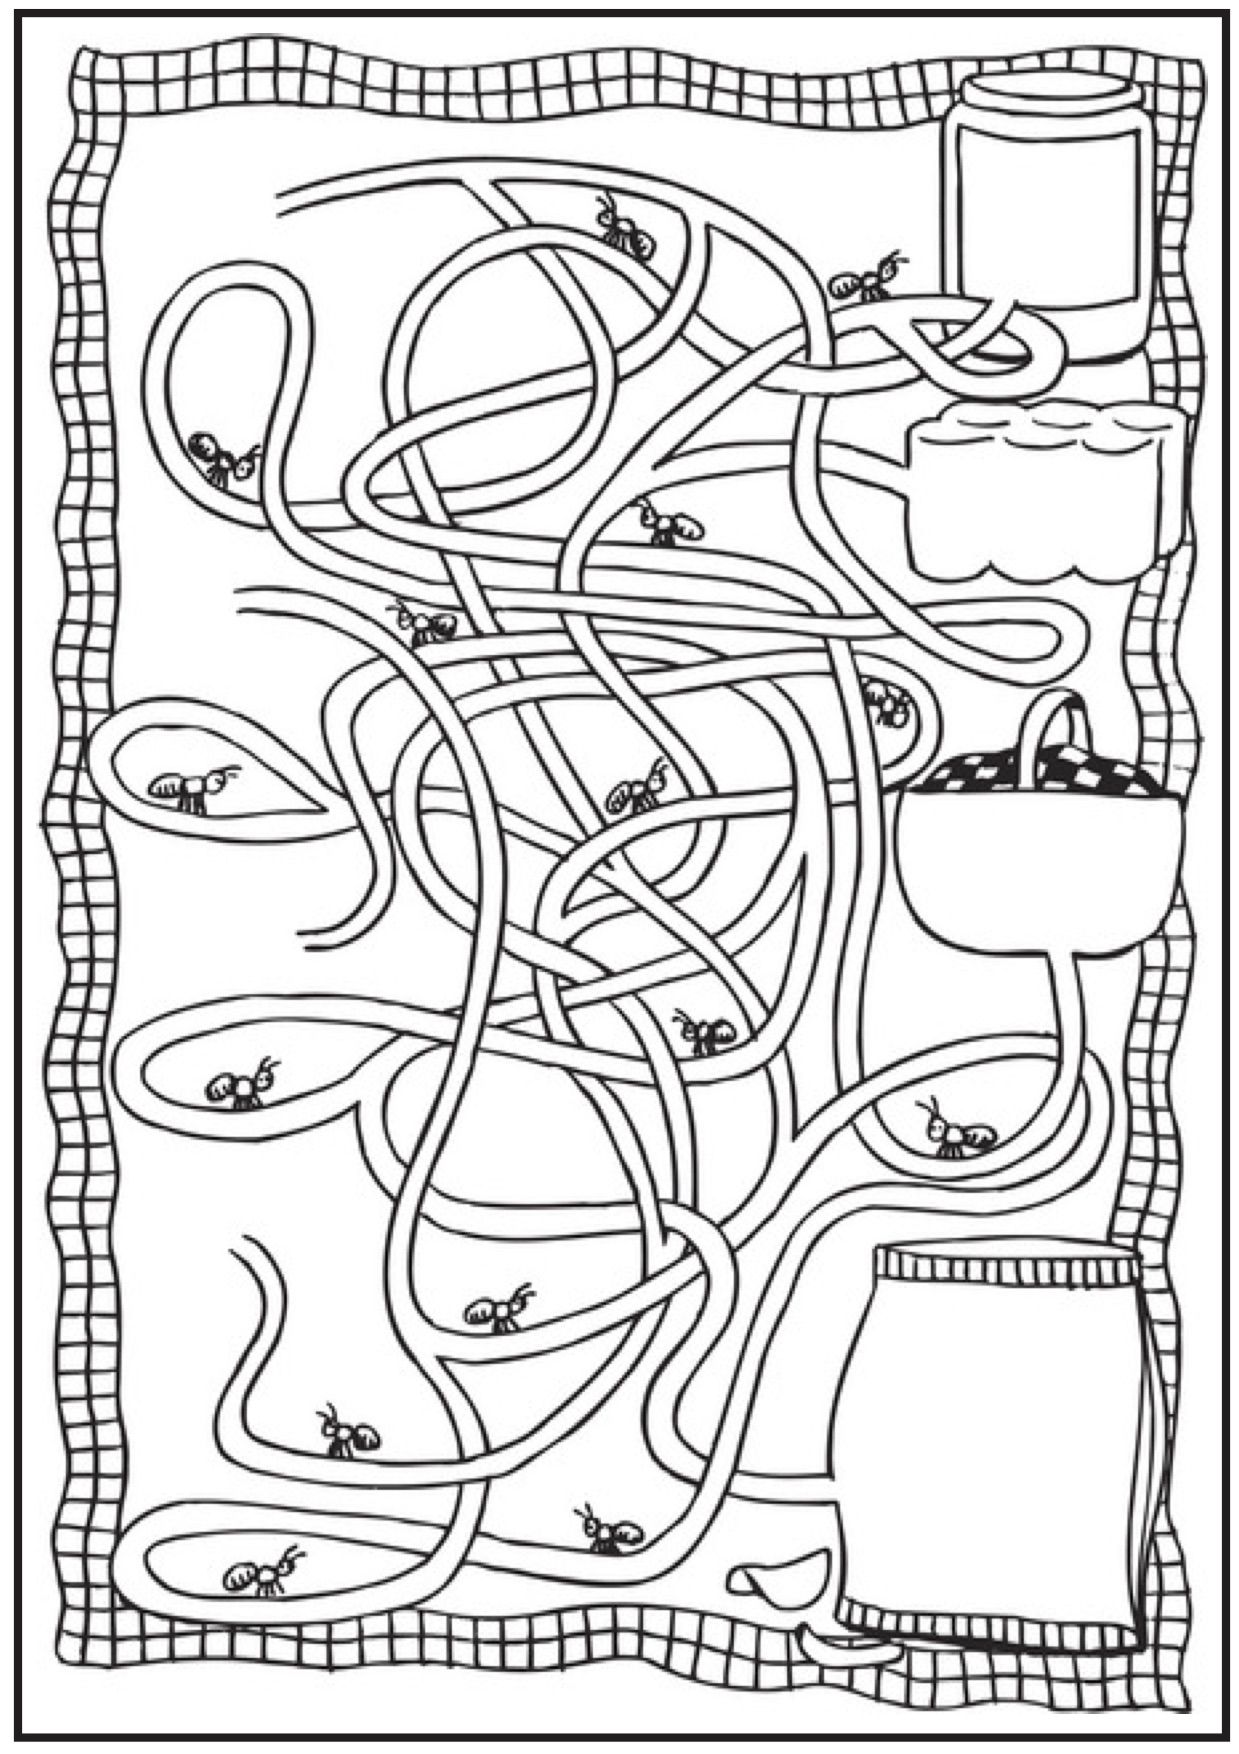 Picnic And Ants Coloring Pages - Coloring Home